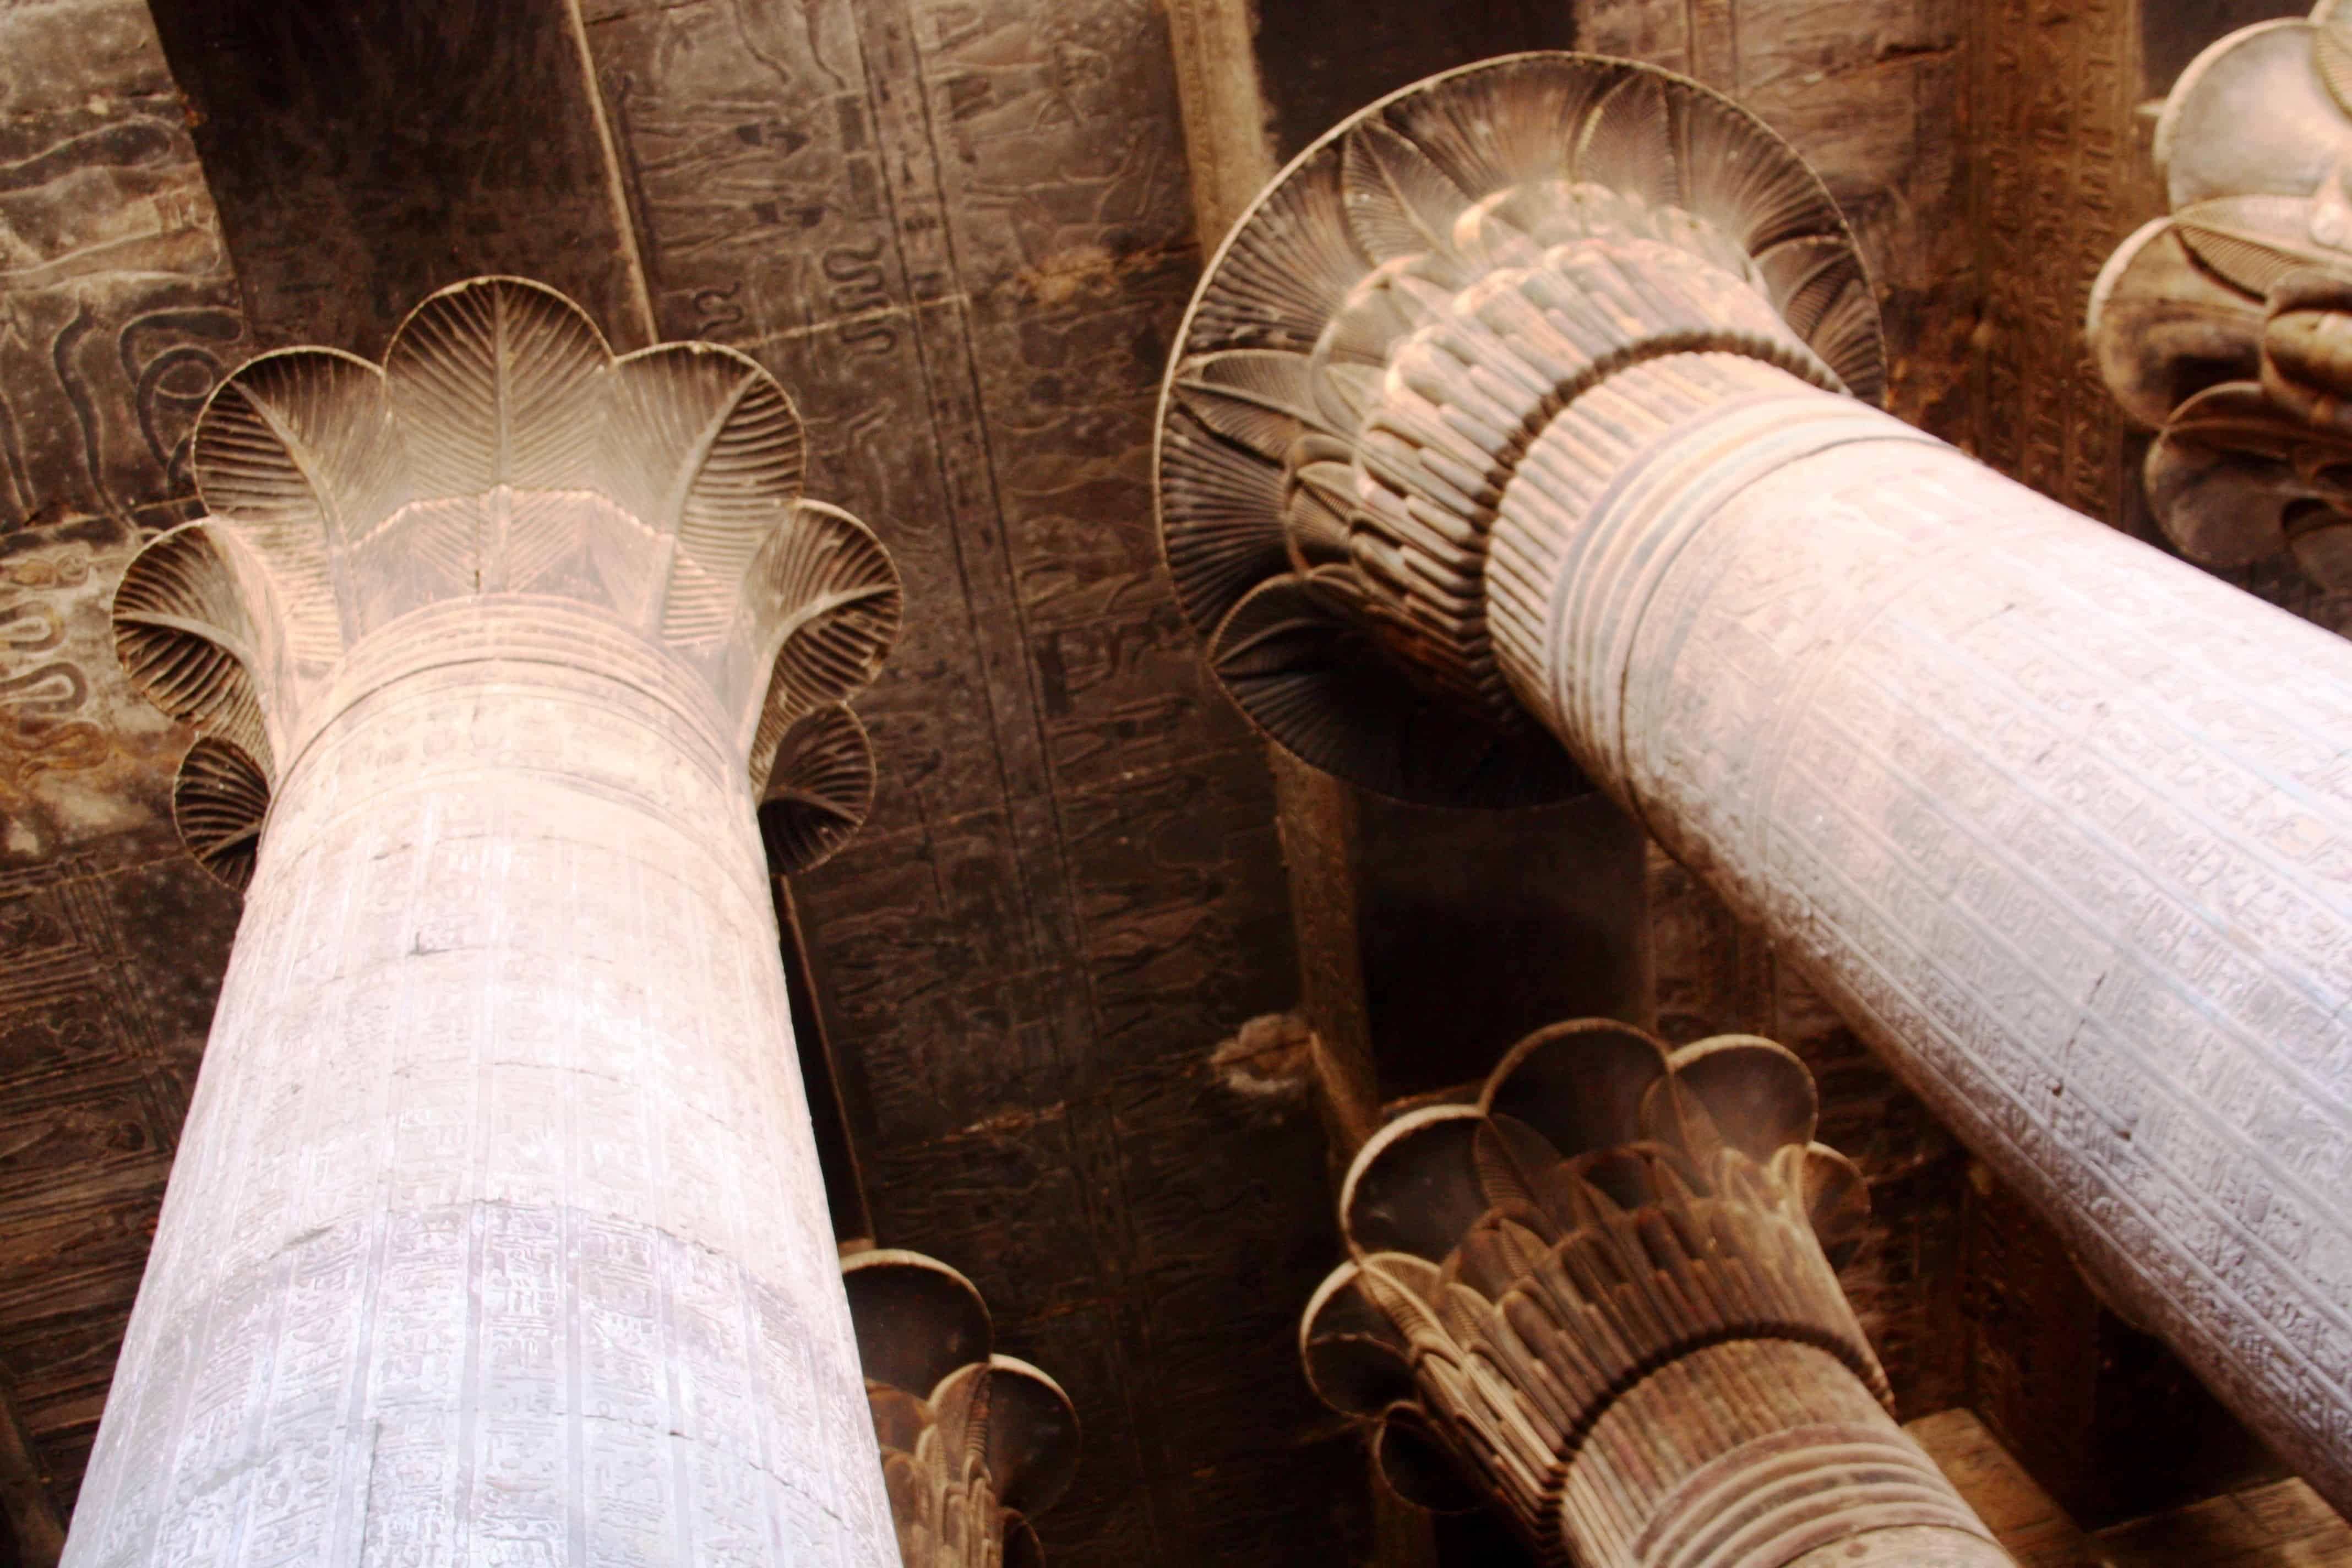 Columns in the hypostyle hall at Temple of Esna, Eypt